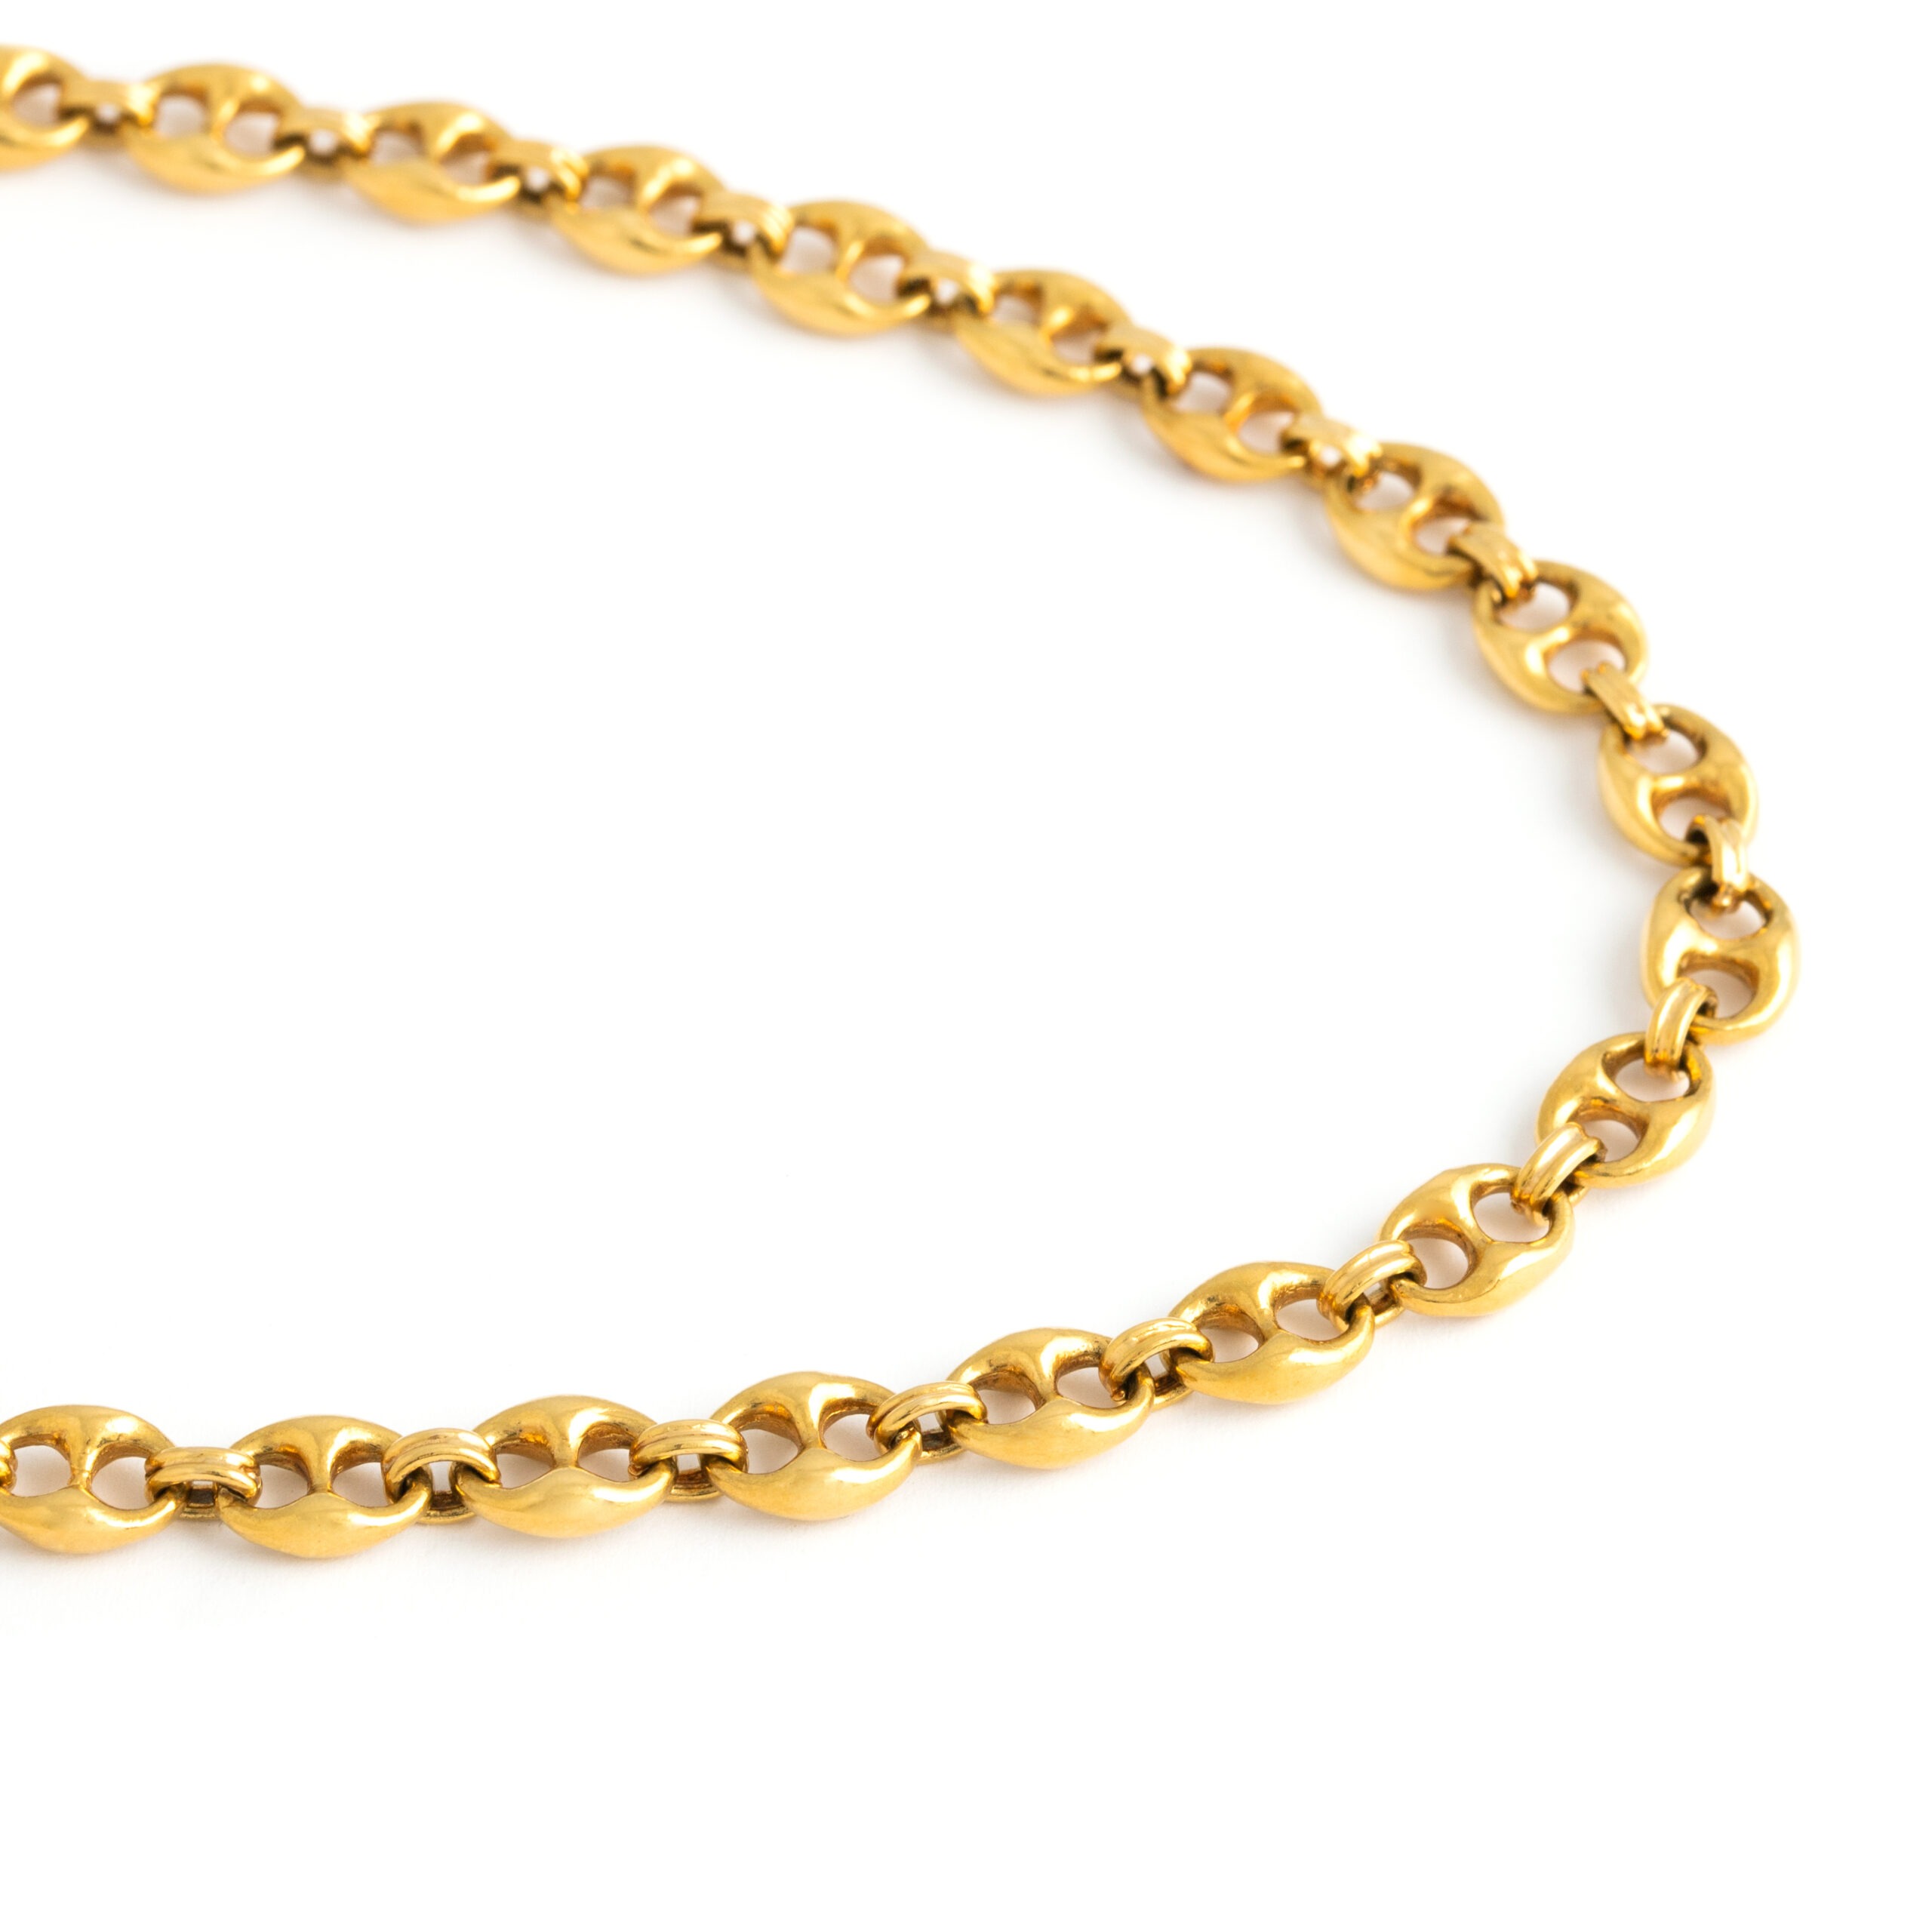 Yellow Gold 18k Chain Coffee Bean Sautoir Necklace. Total length: approx. 90.00 centimeters. Total weight: 104.79 grams